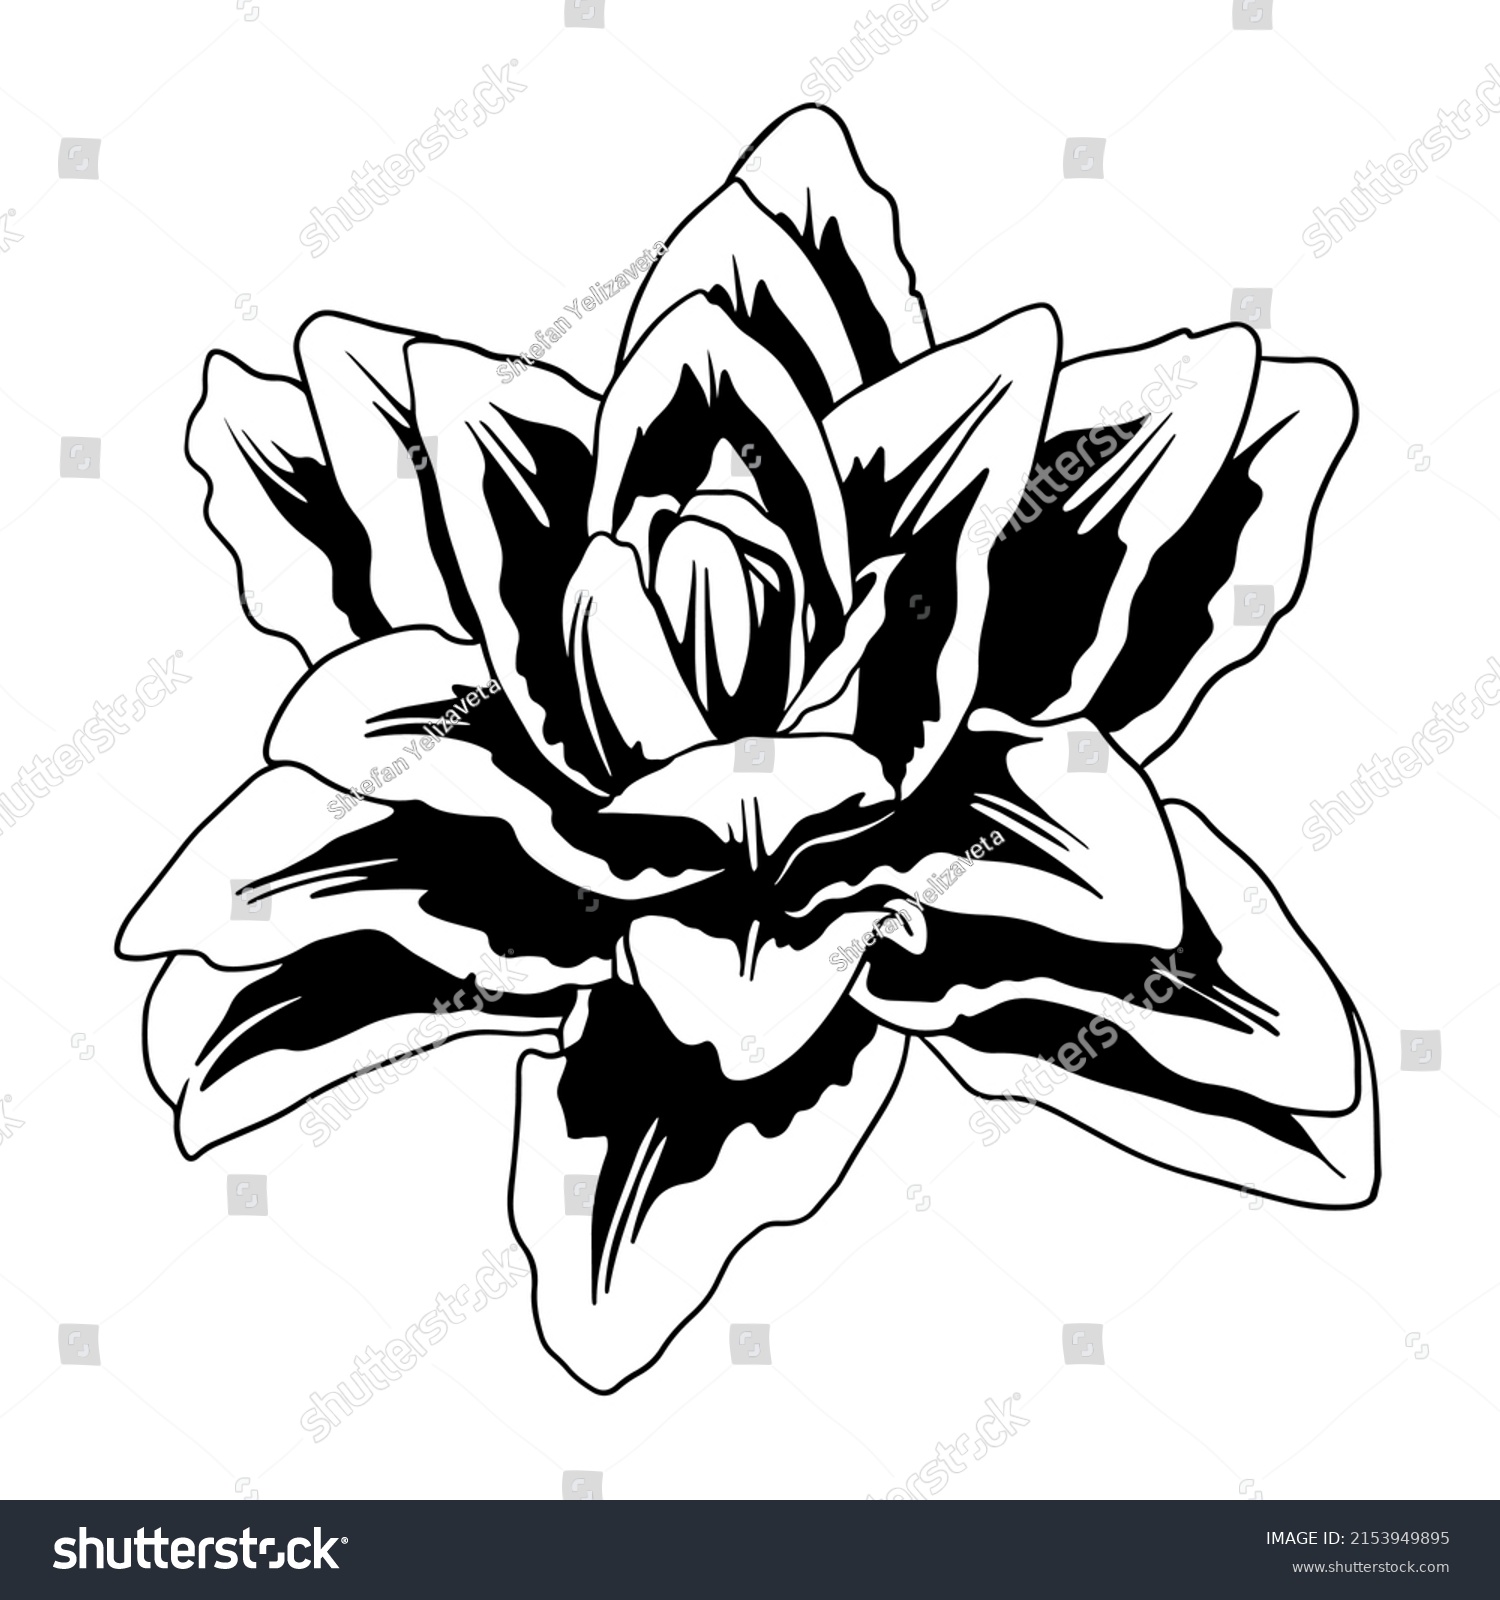 SVG of Lily flower vector. Hand drawn illustration on white background. Isolated element for design of pattern, cosmetics, border, greeting card, flyer, poster, wedding invitations. Tattoo. Cut file clip art svg